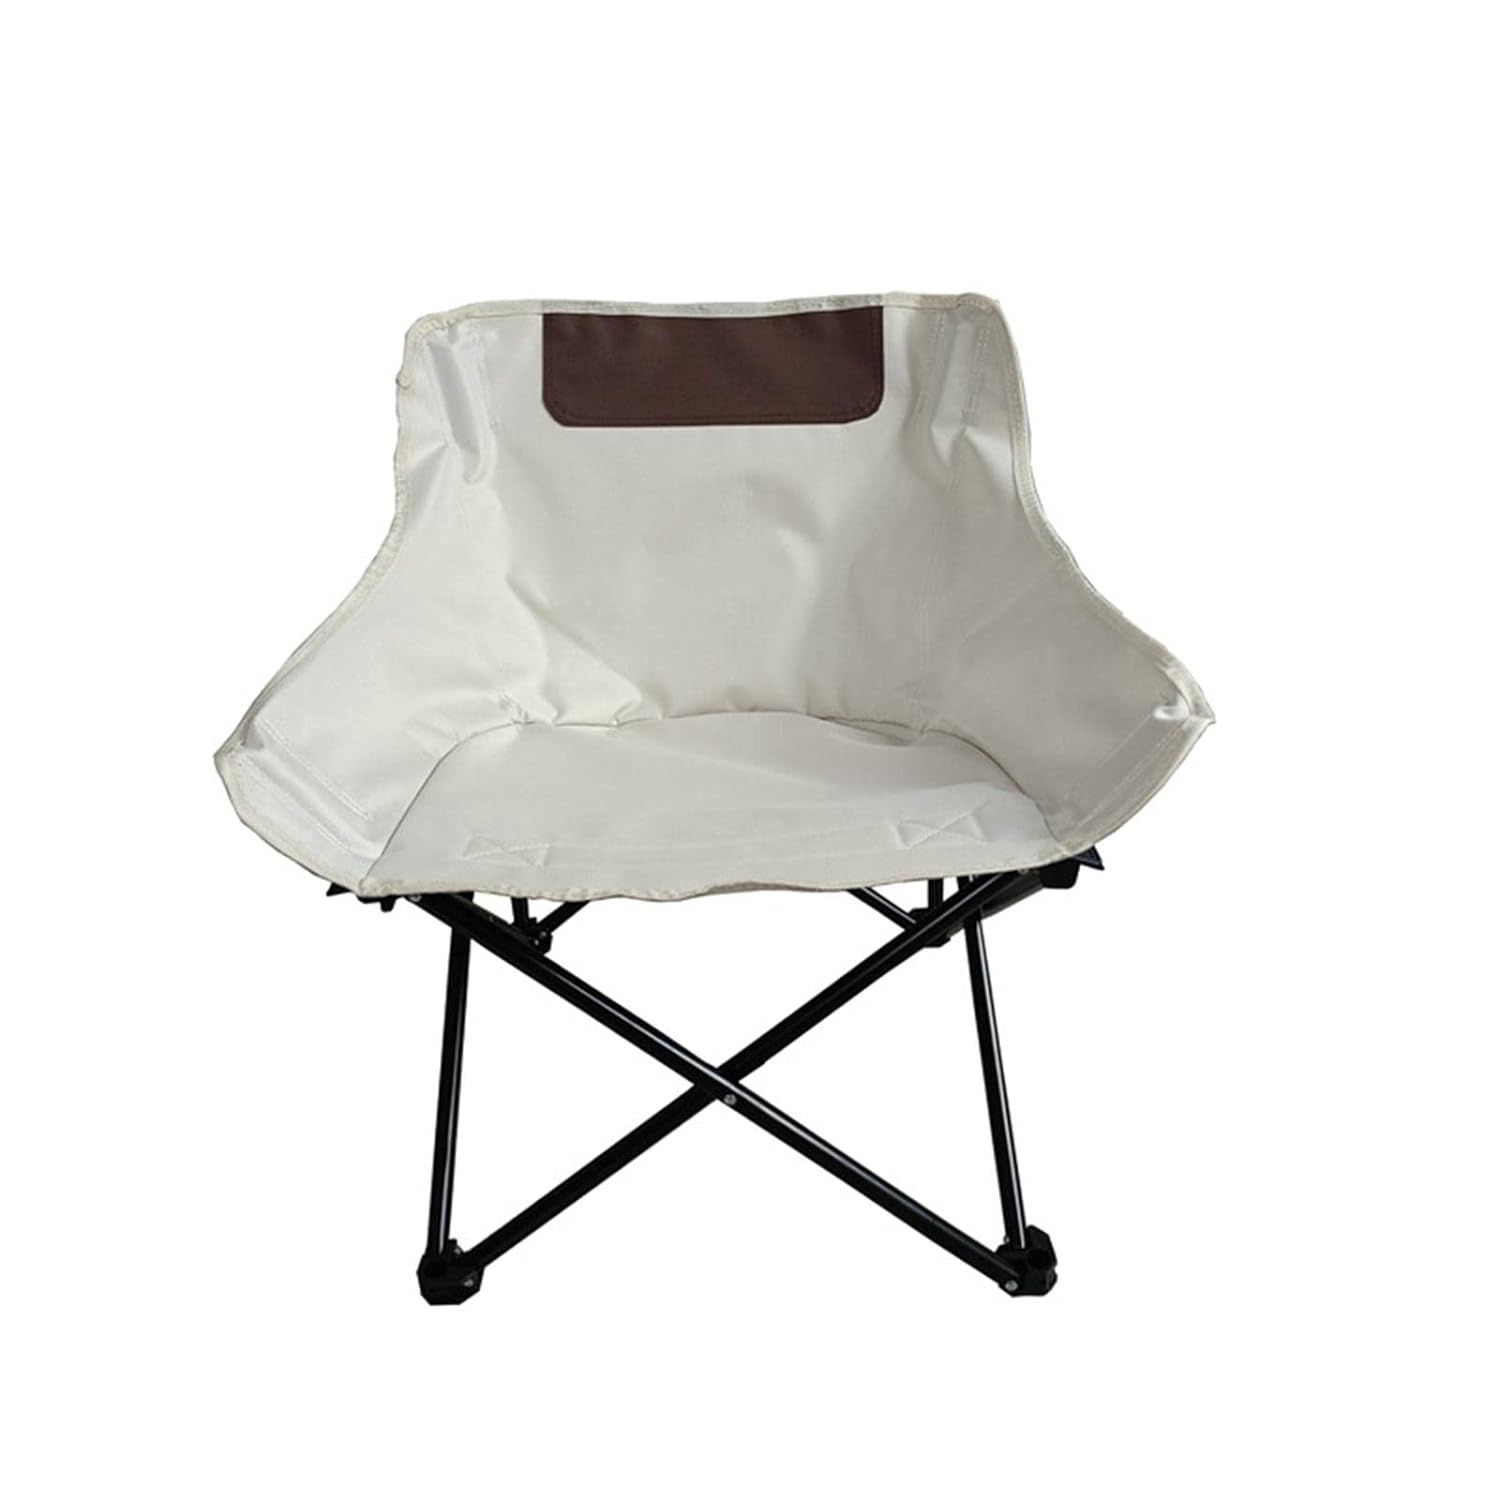 (NET) Camping Folding Chair Portable with Carry Bag Seat